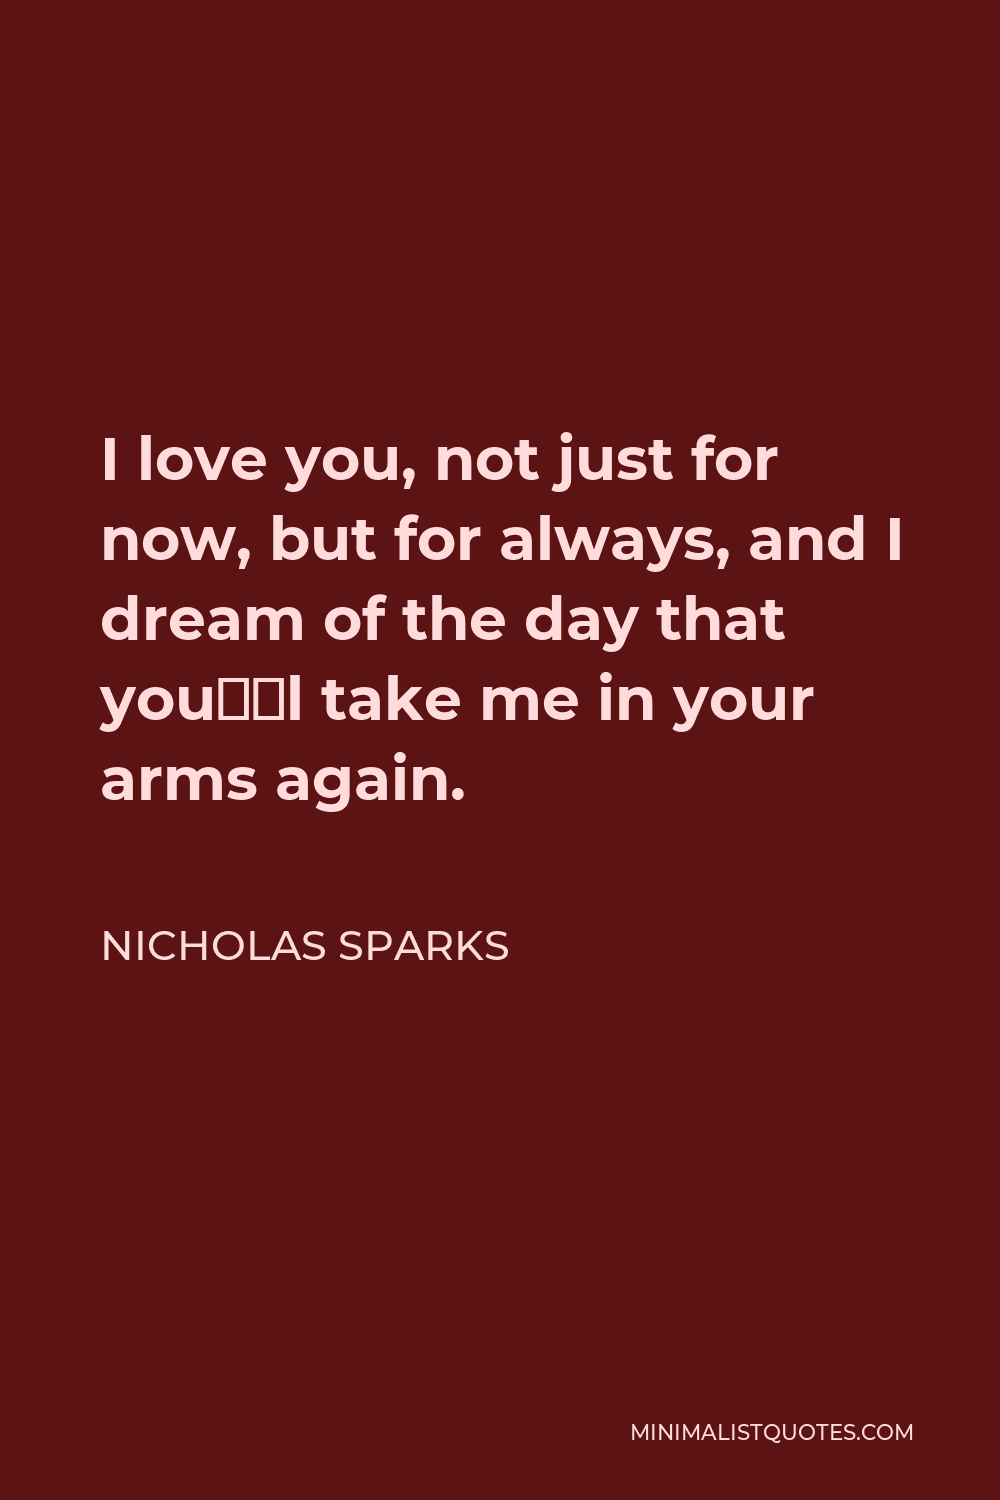 Nicholas Sparks Quote - I love you, not just for now, but for always, and I dream of the day that you’ll take me in your arms again.